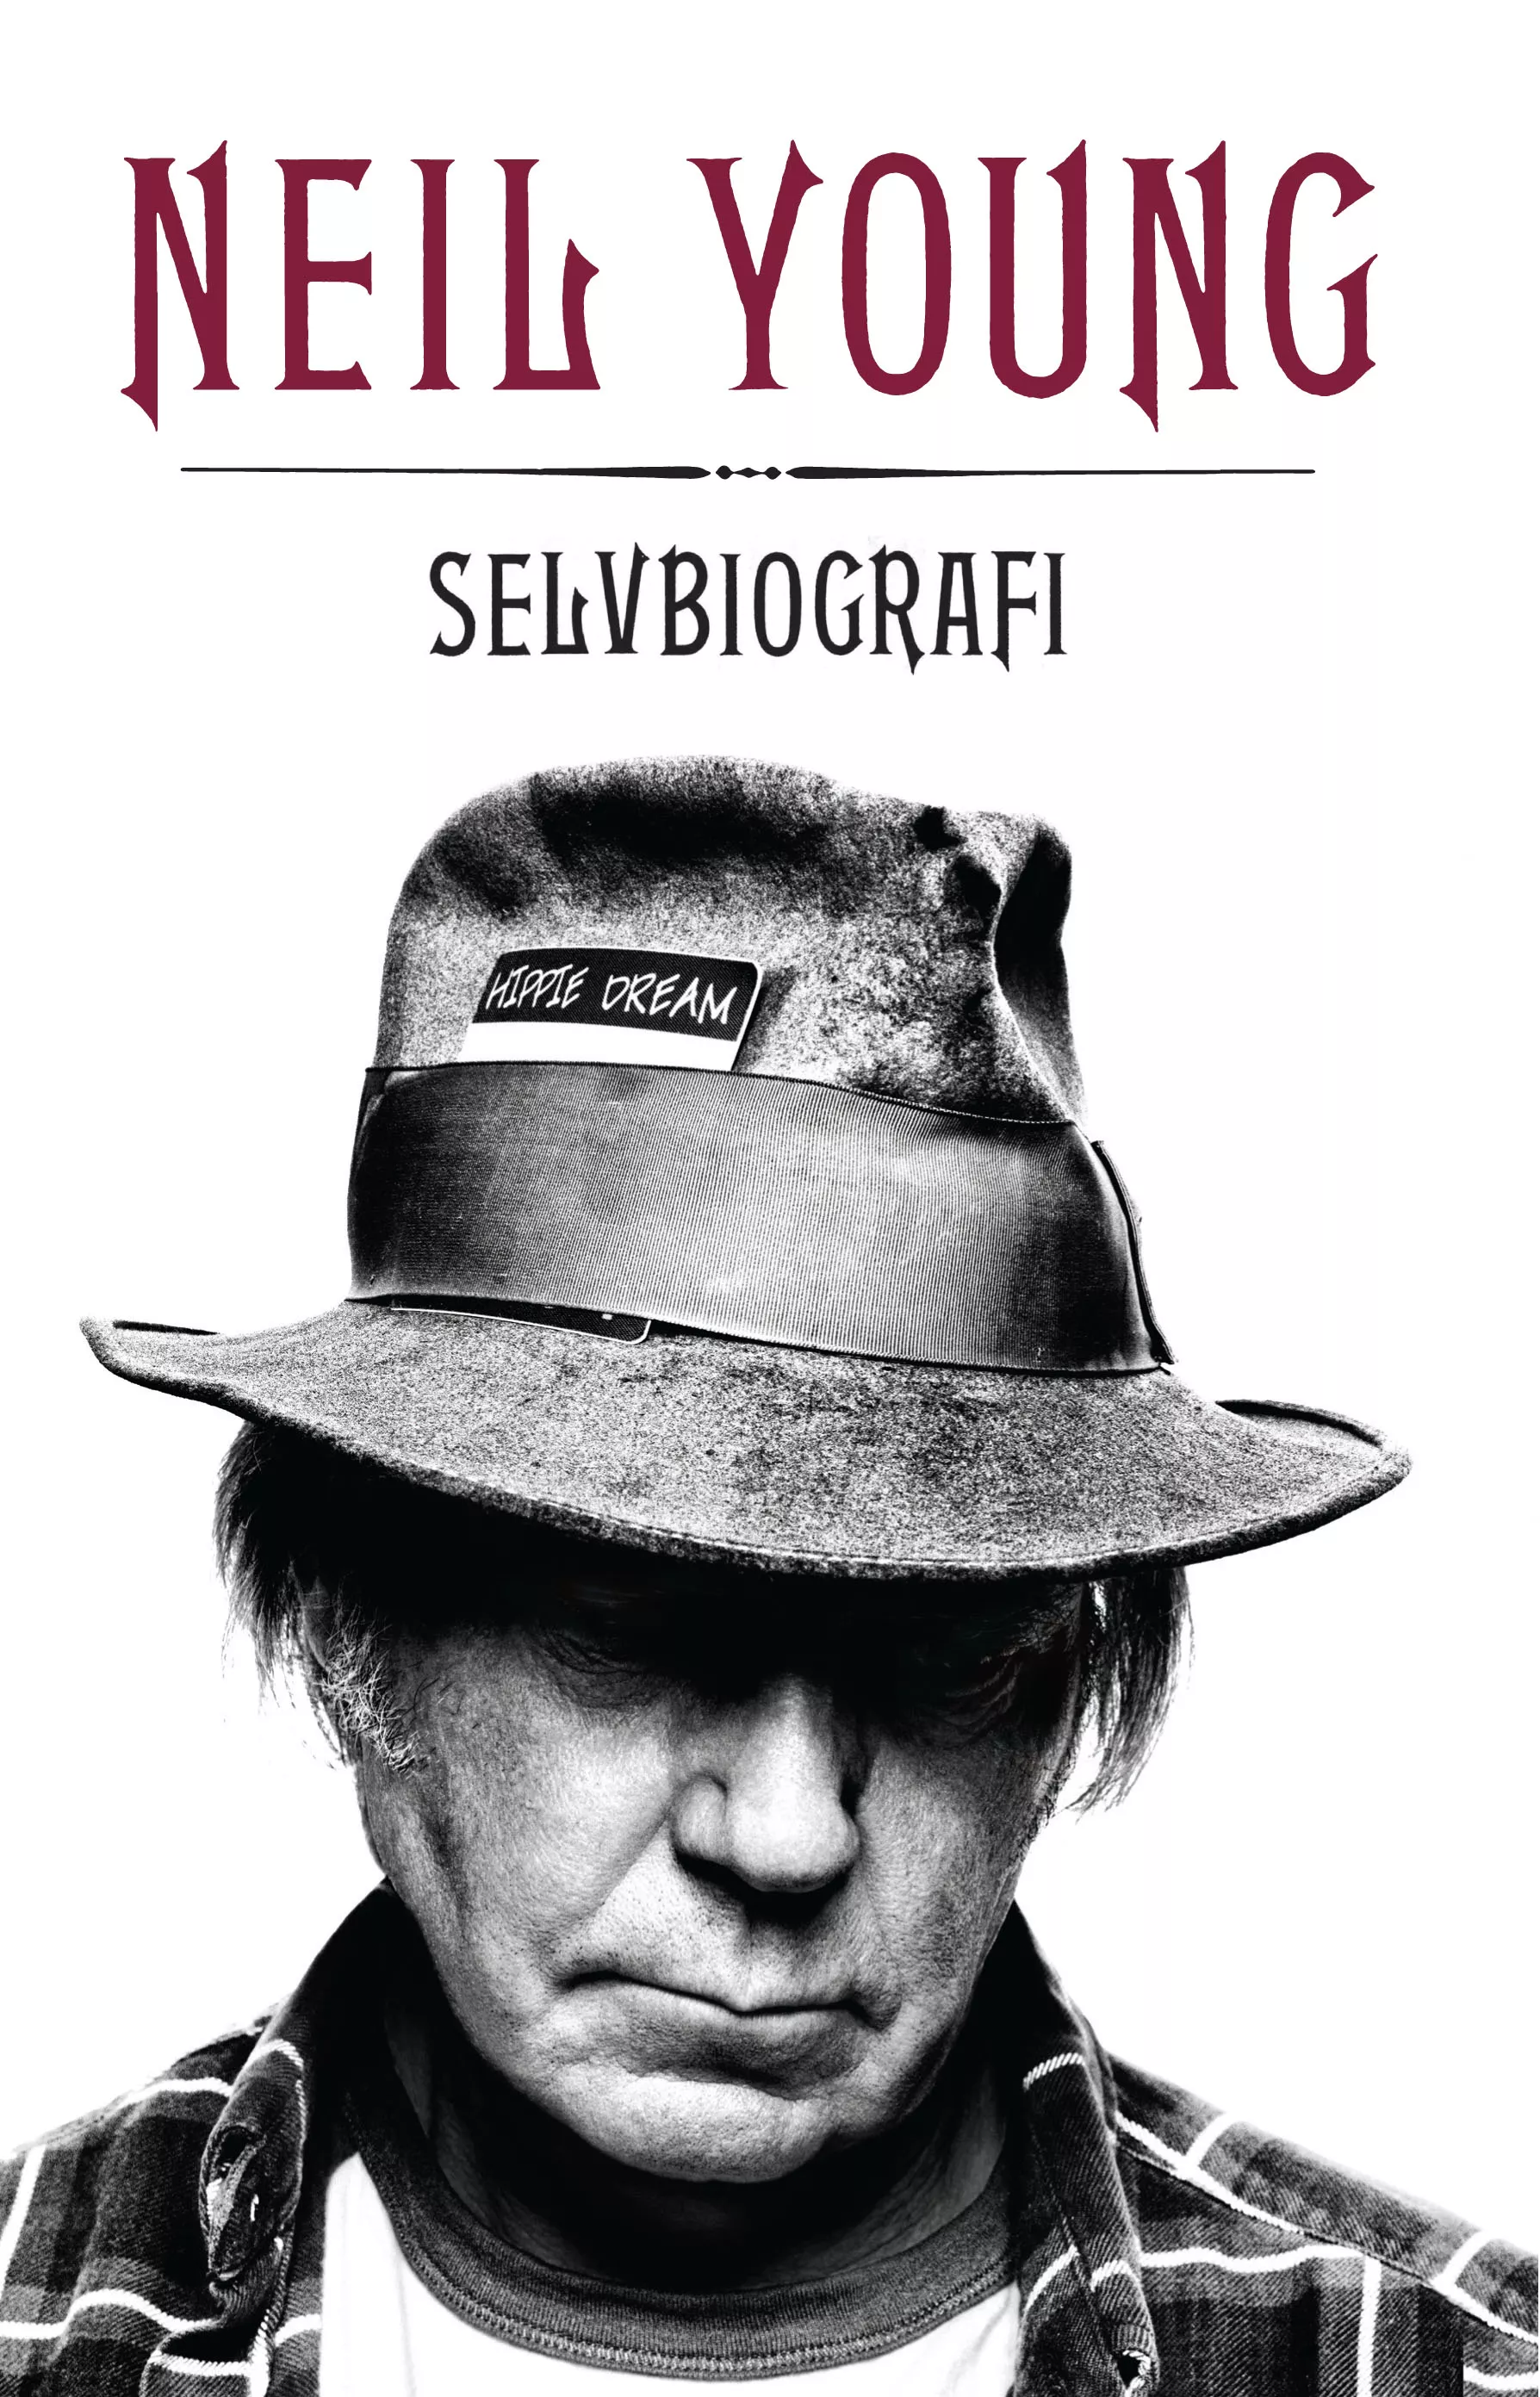 Neil Young udgiver nyt album